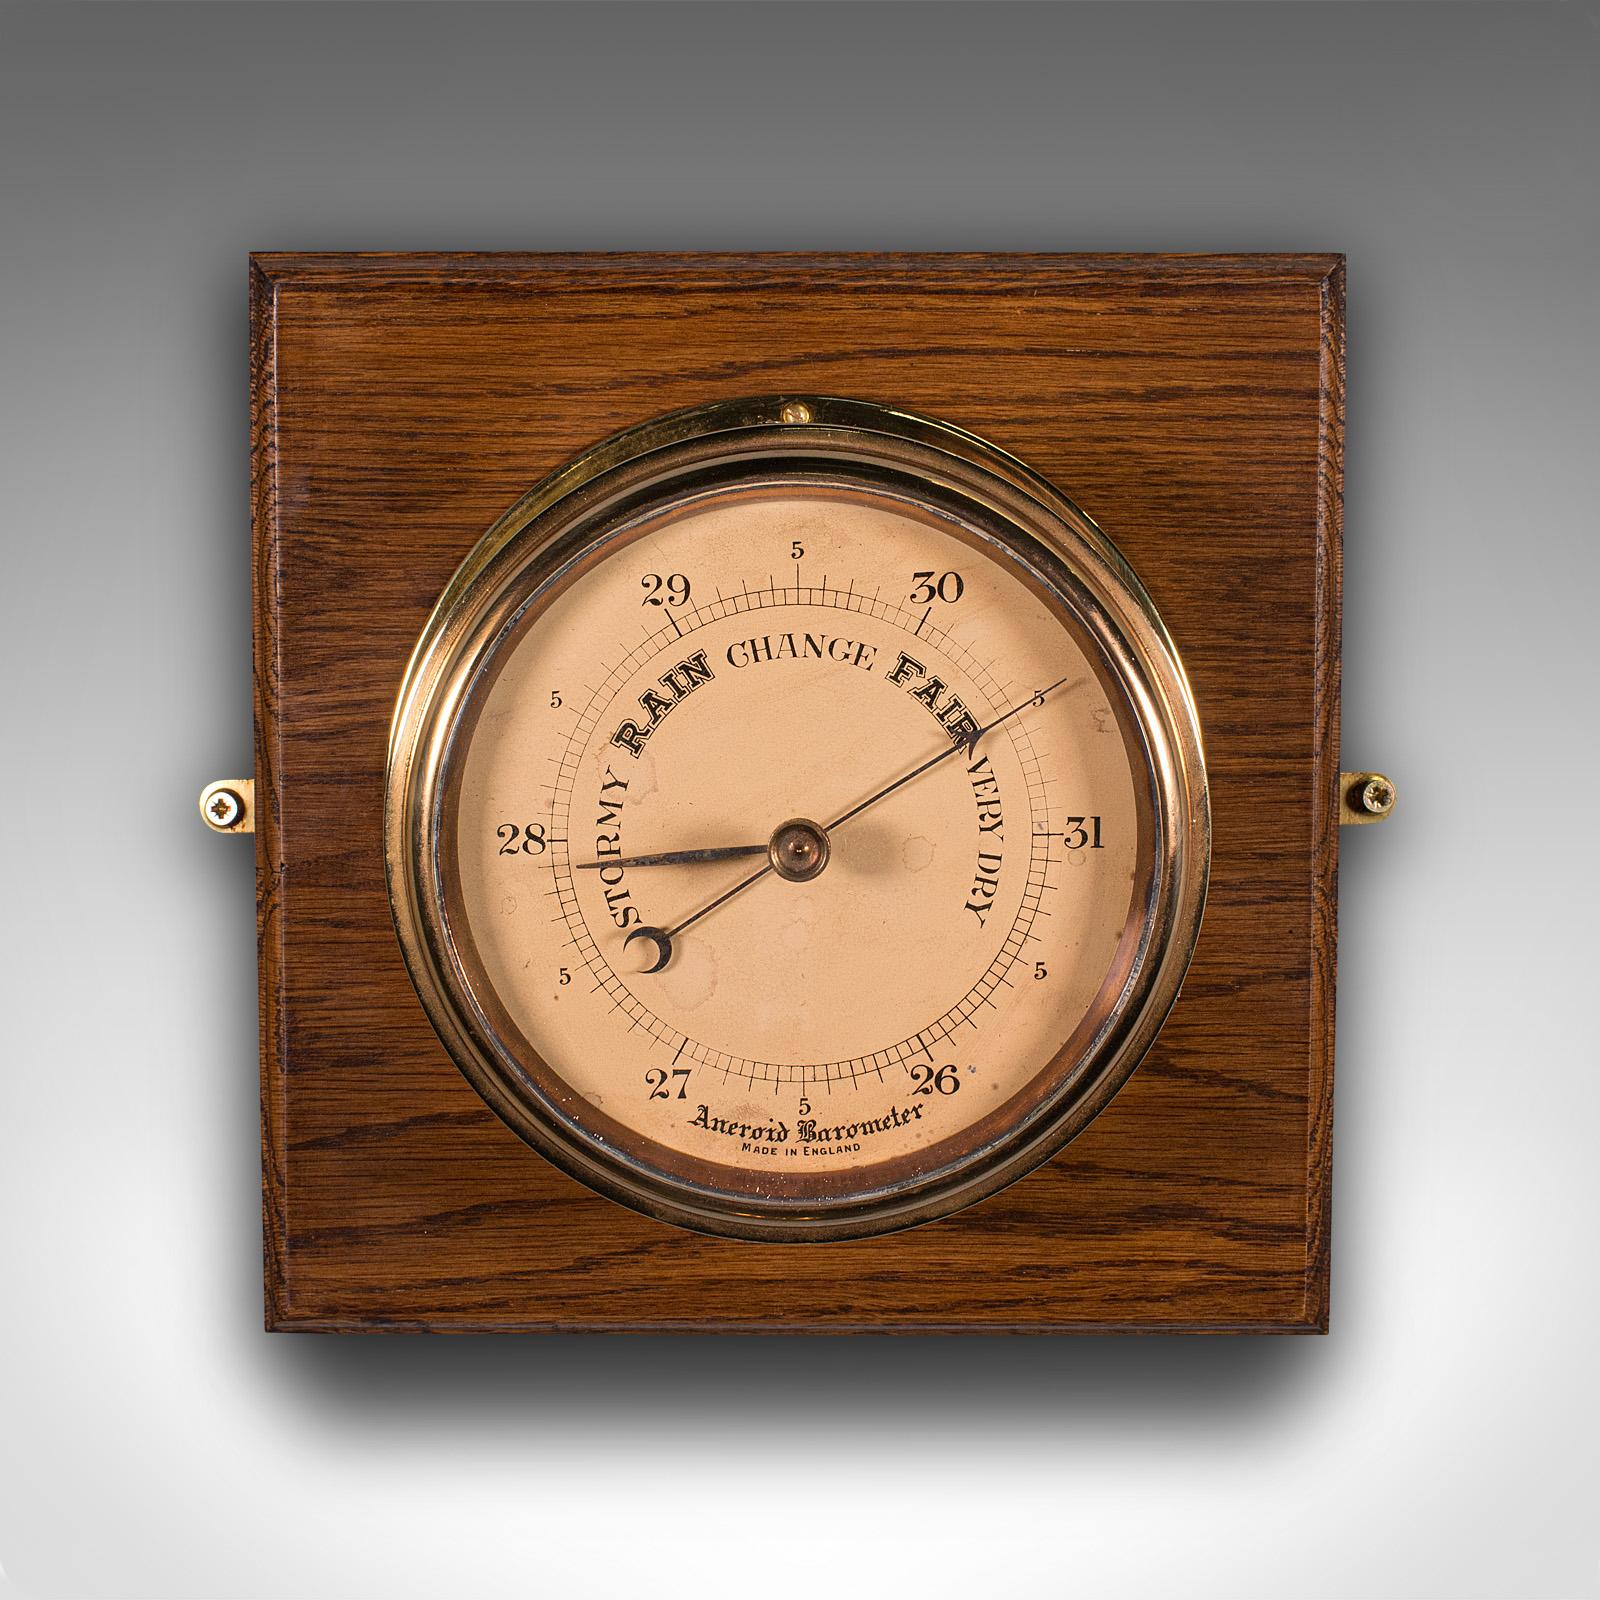 This is an antique ship's bulkhead barometer. An English, brass and oak maritime weather instrument, dating to the Edwardian period, circa 1910.

Delightfully presented maritime barometer
Displays a desirable aged patina throughout
Polished